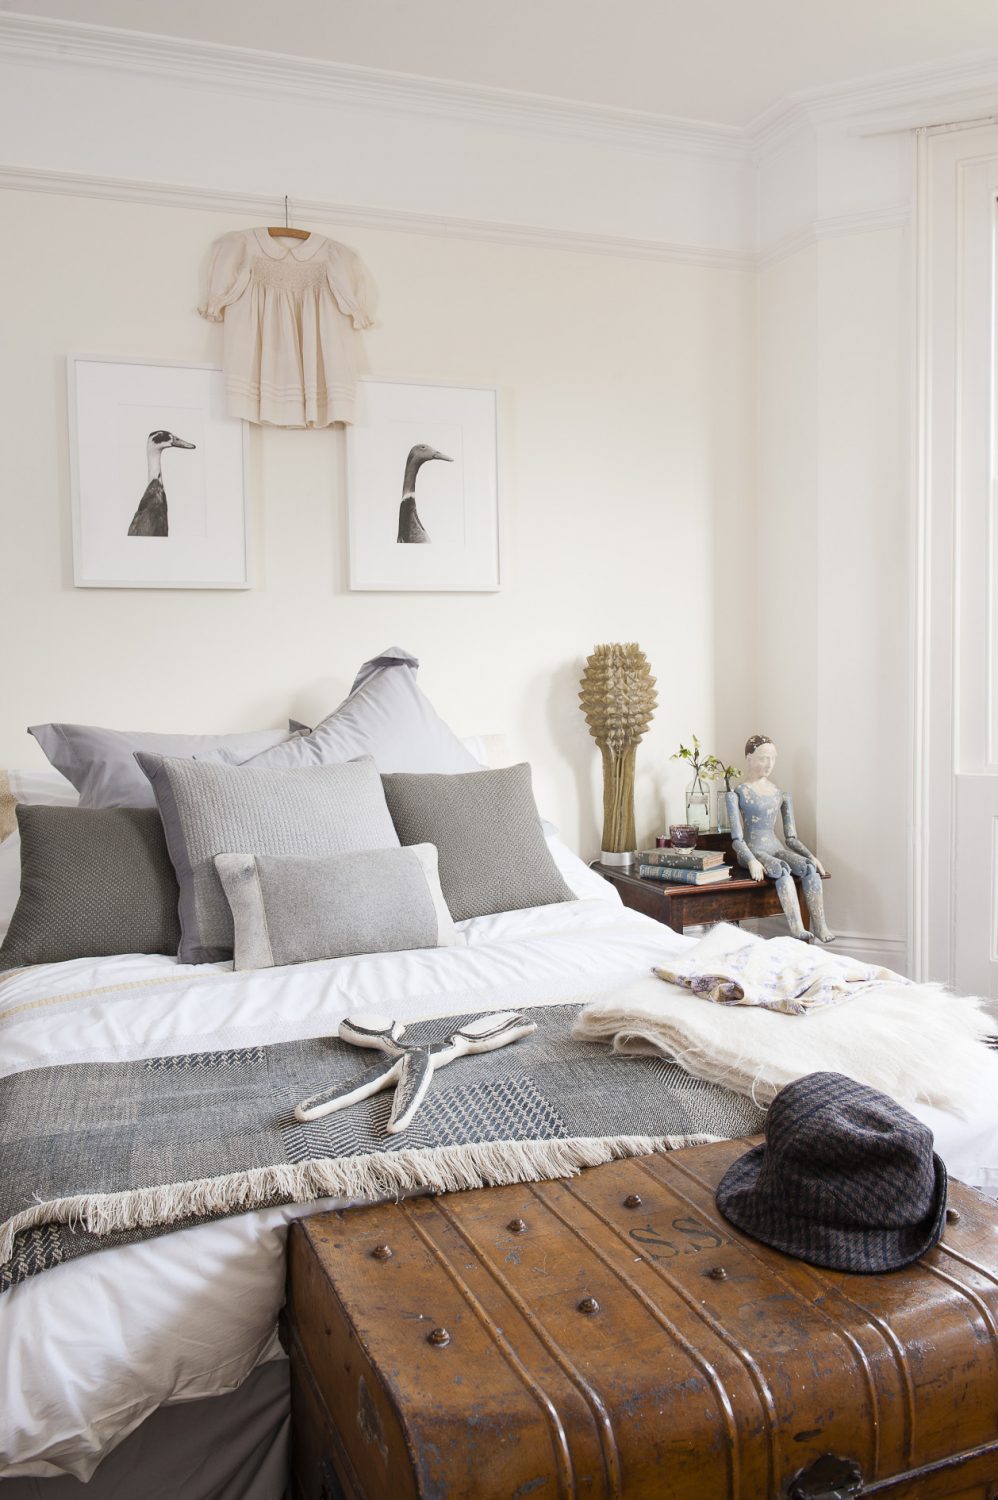 A pair of beautifully illustrated Indian Runner ducks are mounted above the bed in the master bedroom, fitting in perfectly with the room’s cool greys and crisp whites